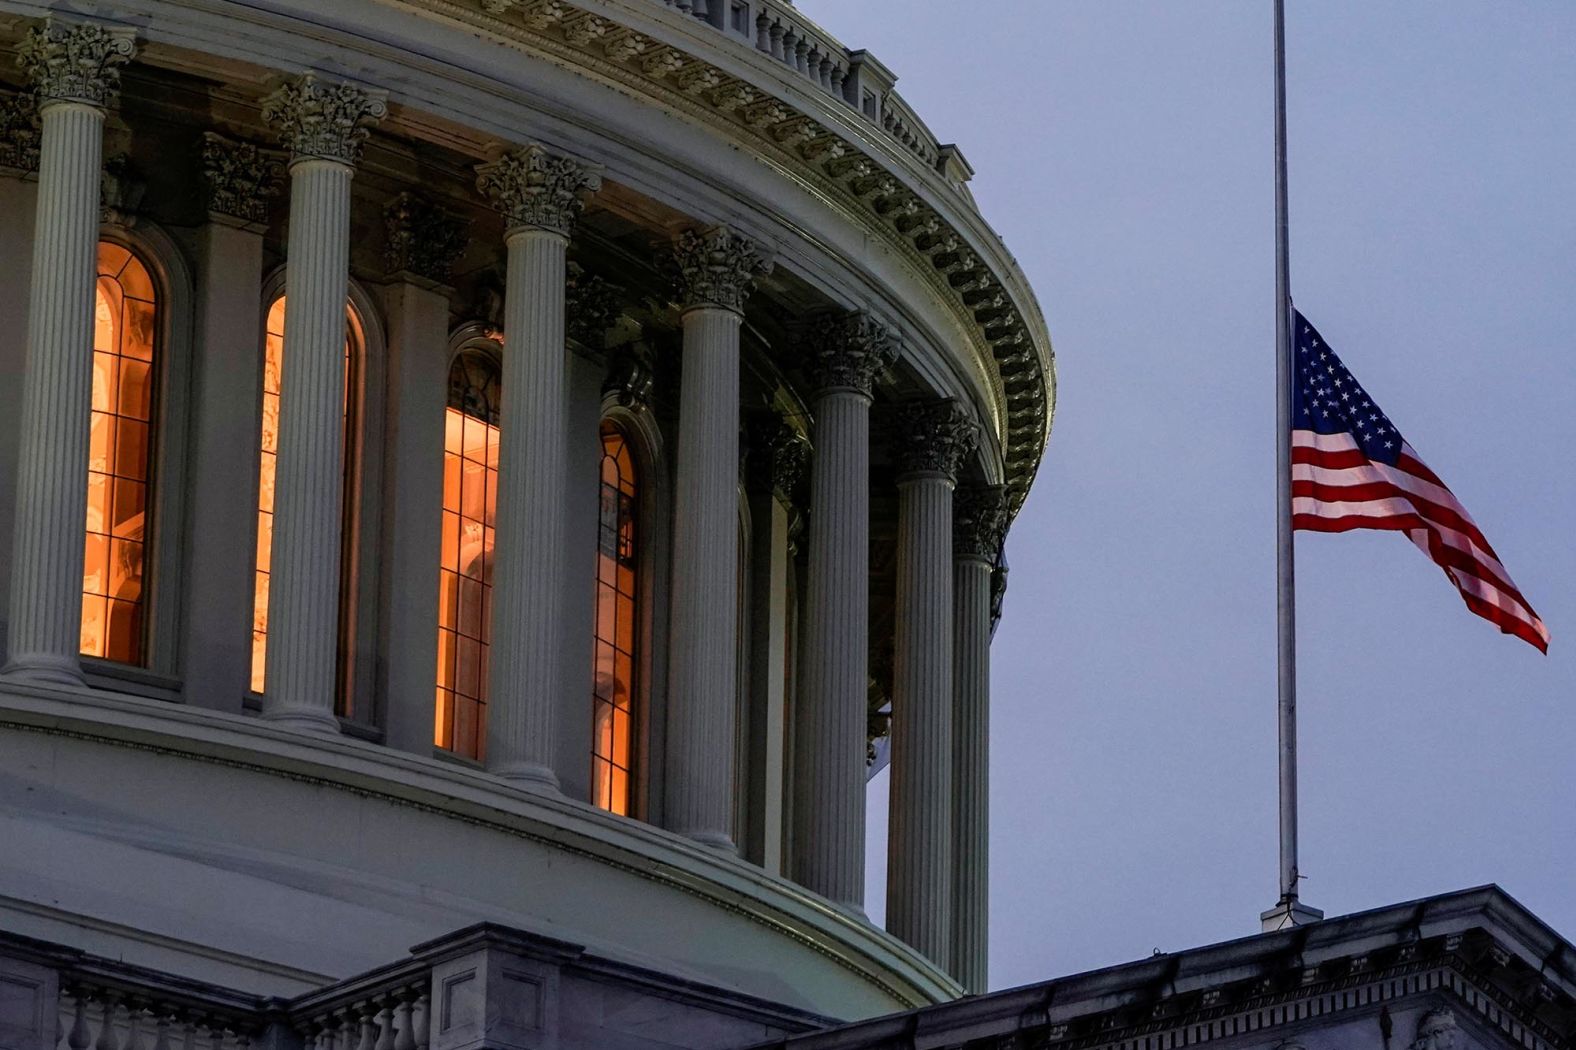 The flag flies at half-staff at the US Capitol on January 11. Pelosi ordered flags at the Capitol to be flown at half-staff <a href="index.php?page=&url=https%3A%2F%2Fwww.cnn.com%2F2021%2F01%2F10%2Fpolitics%2Fbrian-sicknick-howard-liebengood-white-house-flag%2Findex.html" target="_blank">to honor US Capitol Police officers Brian Sicknick and Howard Liebengood,</a> who were both on duty when a mob of Trump's supporters stormed the US Capitol. Sicknick died due to injuries sustained while on duty, Capitol Police said. Liebengood died while off duty. The announcement did not state his cause of death.